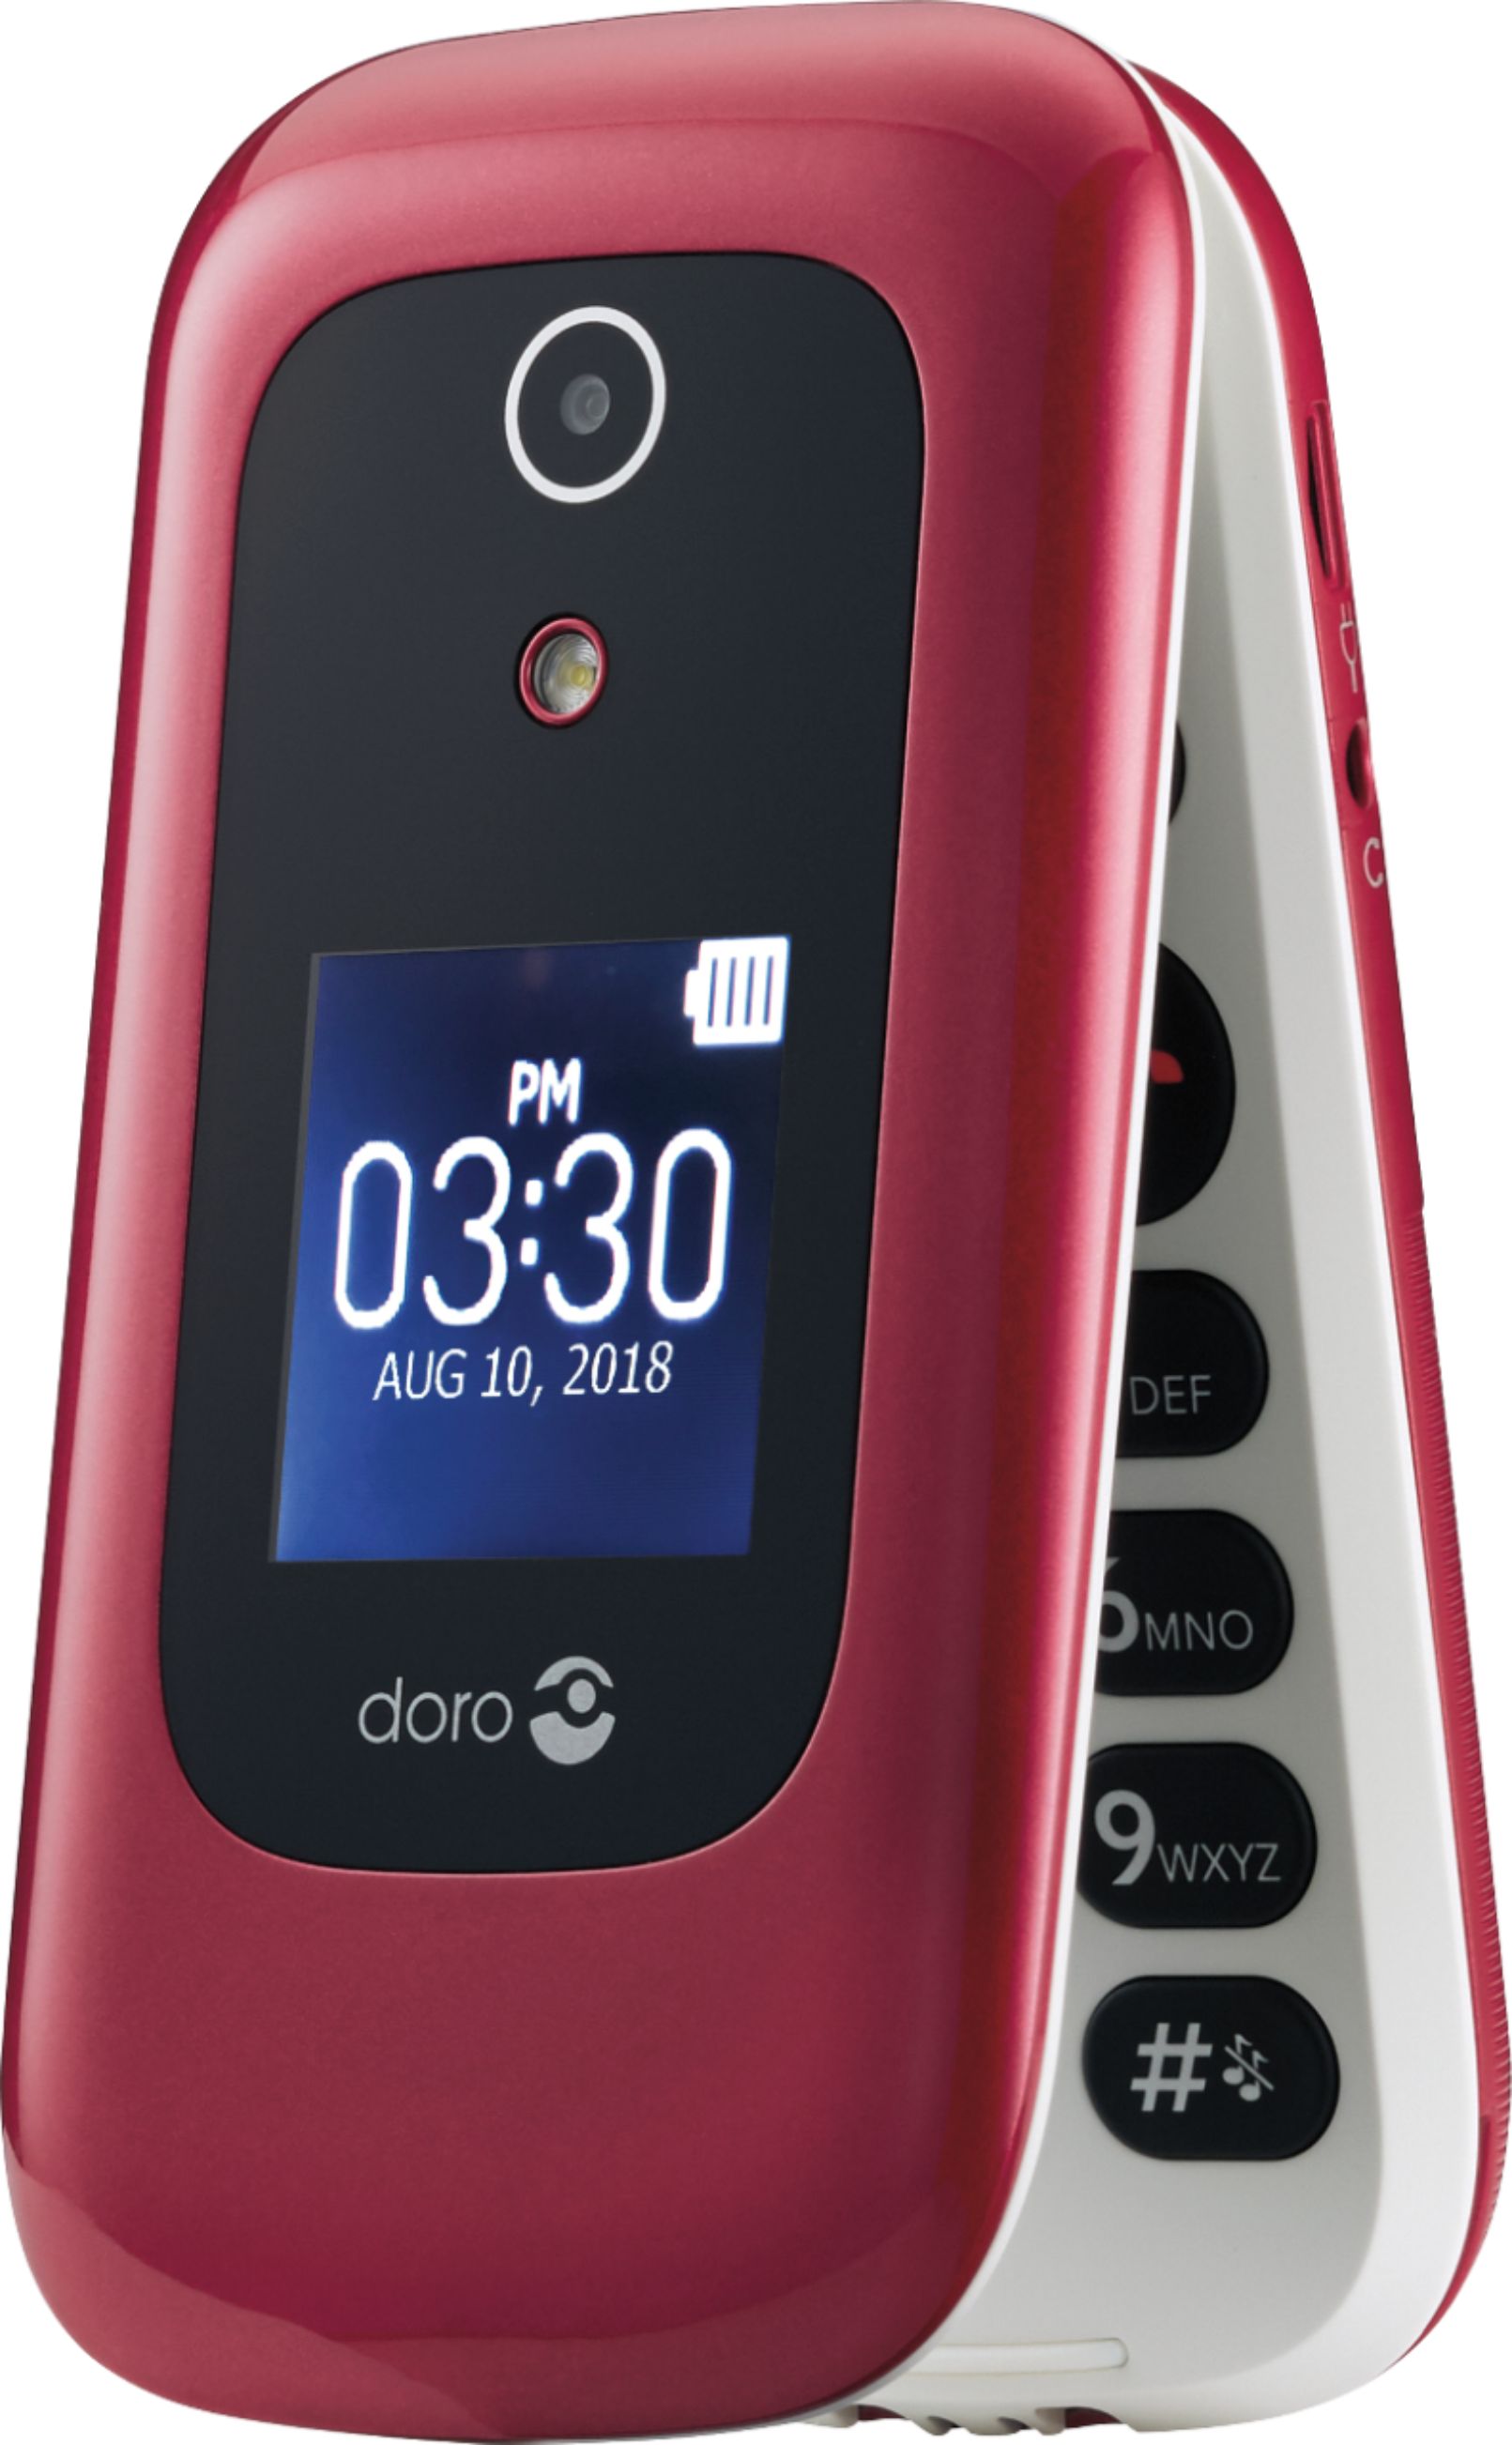 Customer Reviews Doro 7050 with 512MB Memory Cell Phone White/Burgundy